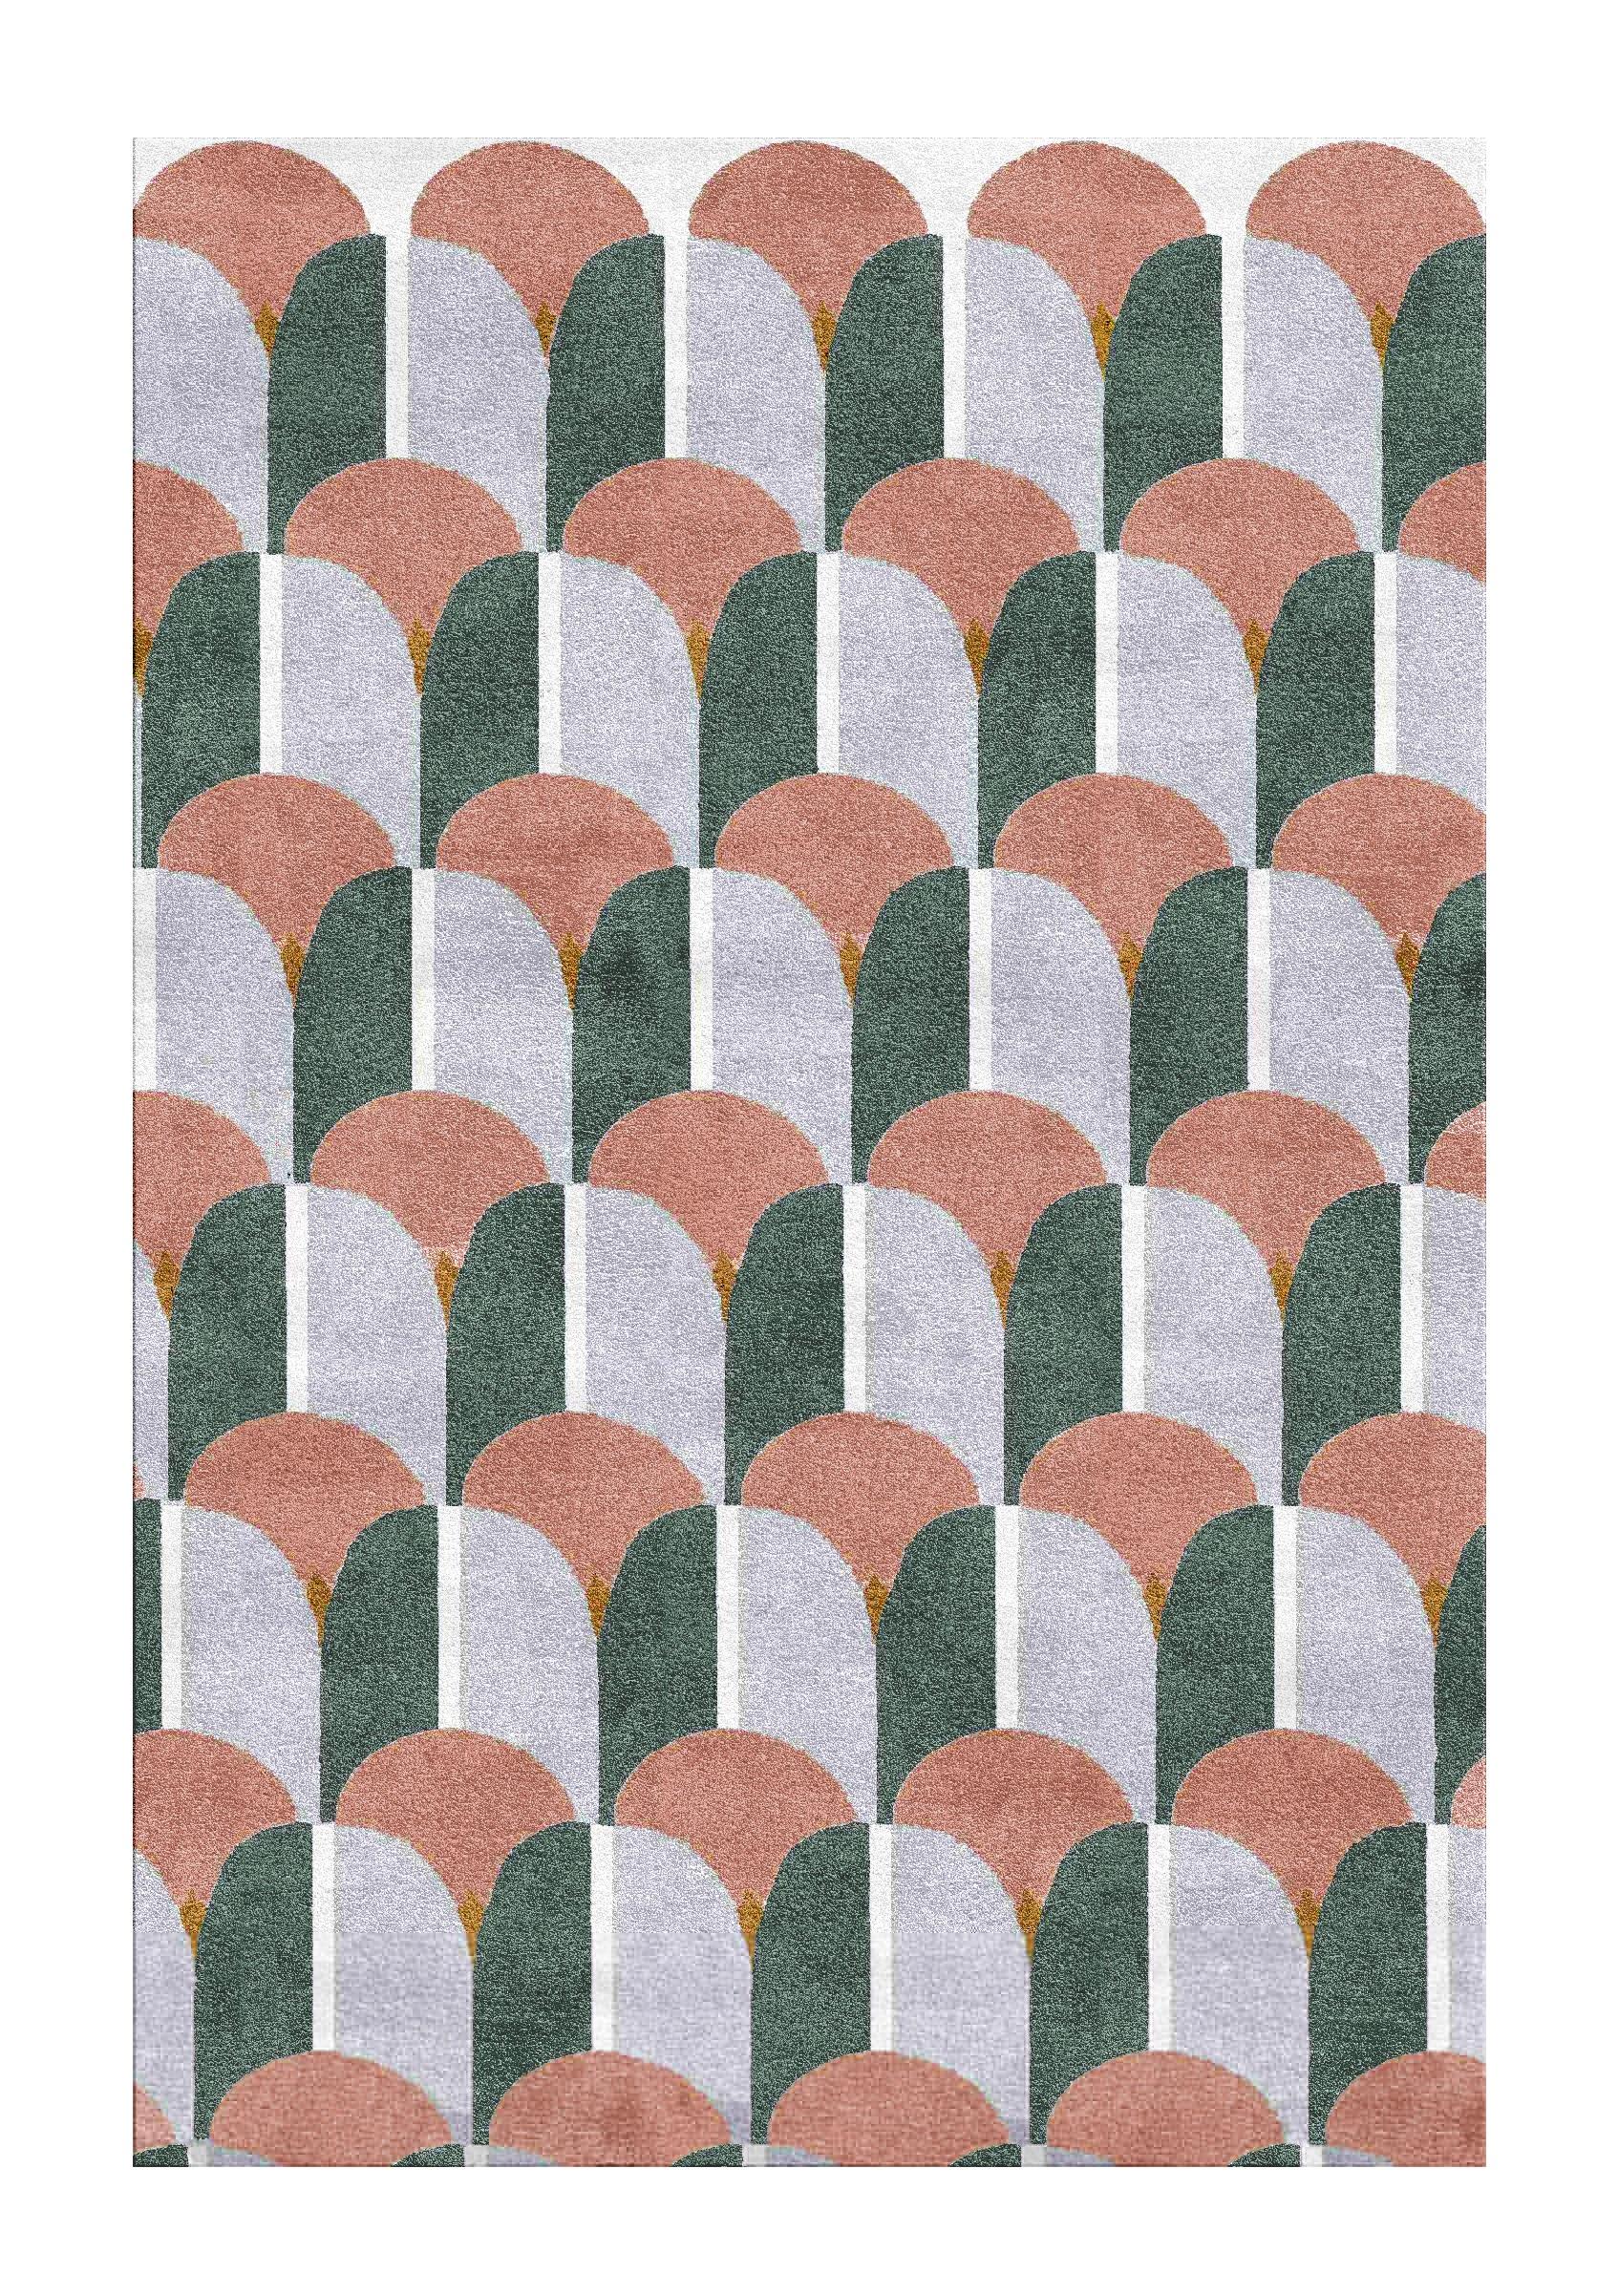 Rinascimento rug II by Sarah Balivo.
Dimensions: D 300 x W 200 cm.
Materials: viscose, linen.
Available in other colors.

The Rinascimento collection drives its inspiration from Renaissance floorings, a pure chromatic interplay meant to create